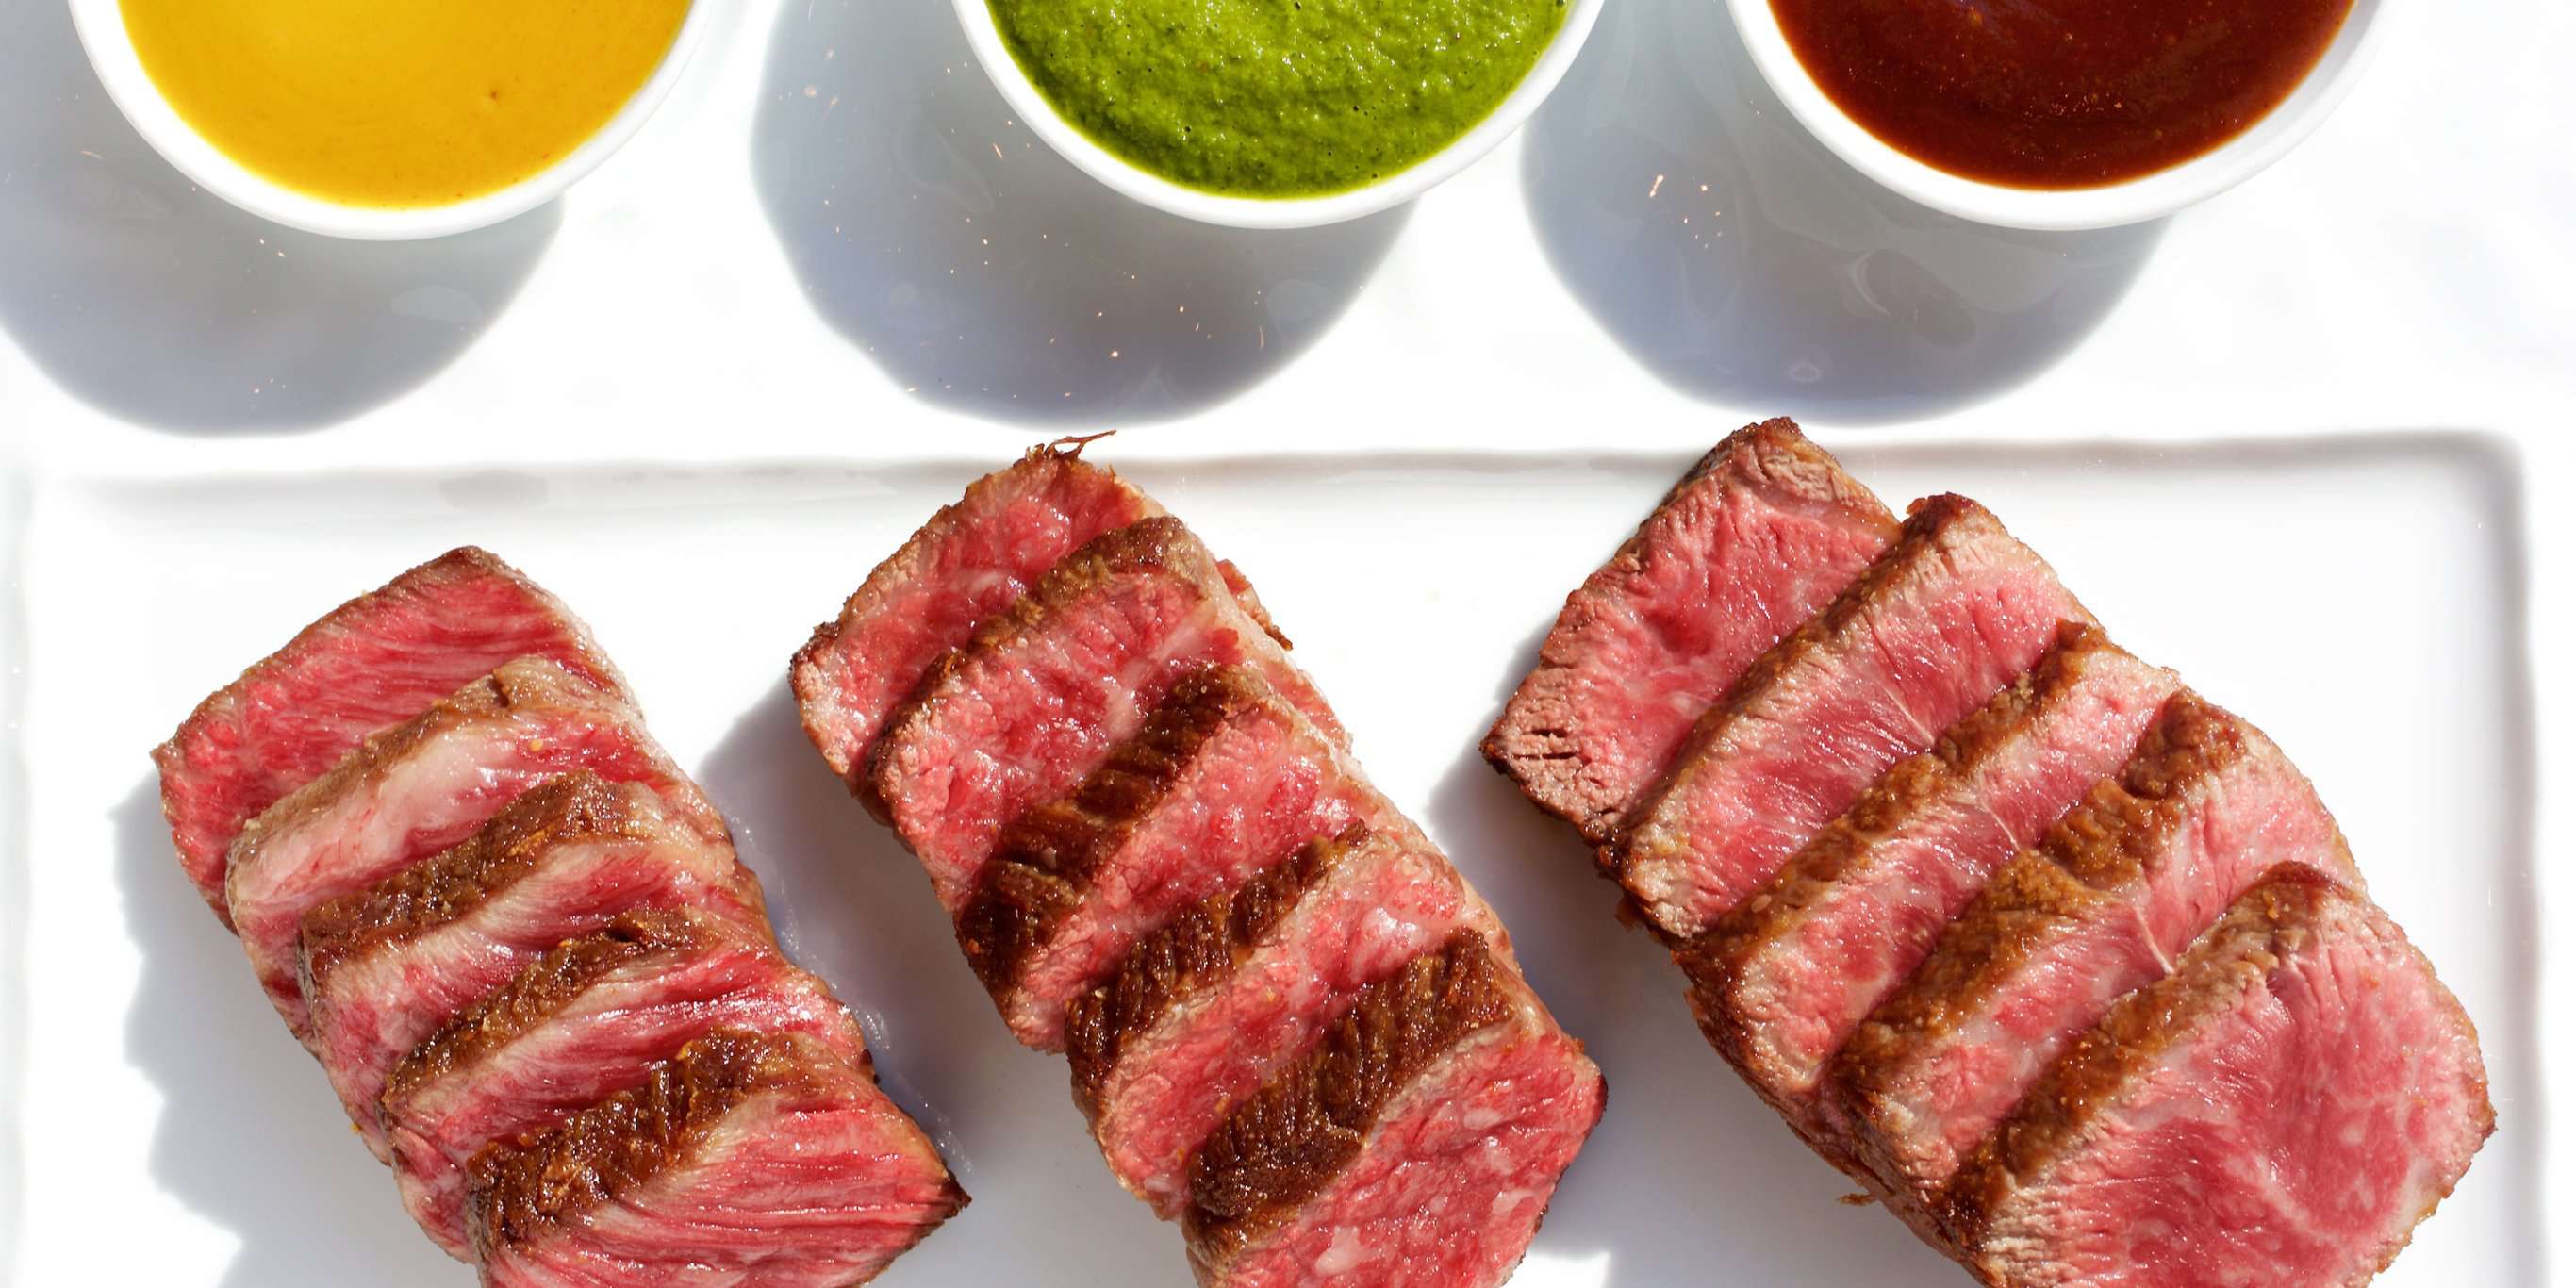 Taboola Ad Example 55750 - The Rarest Steak In The World Can Cost Over $300. Here's Why Wagyu Beef Is So Expensive.